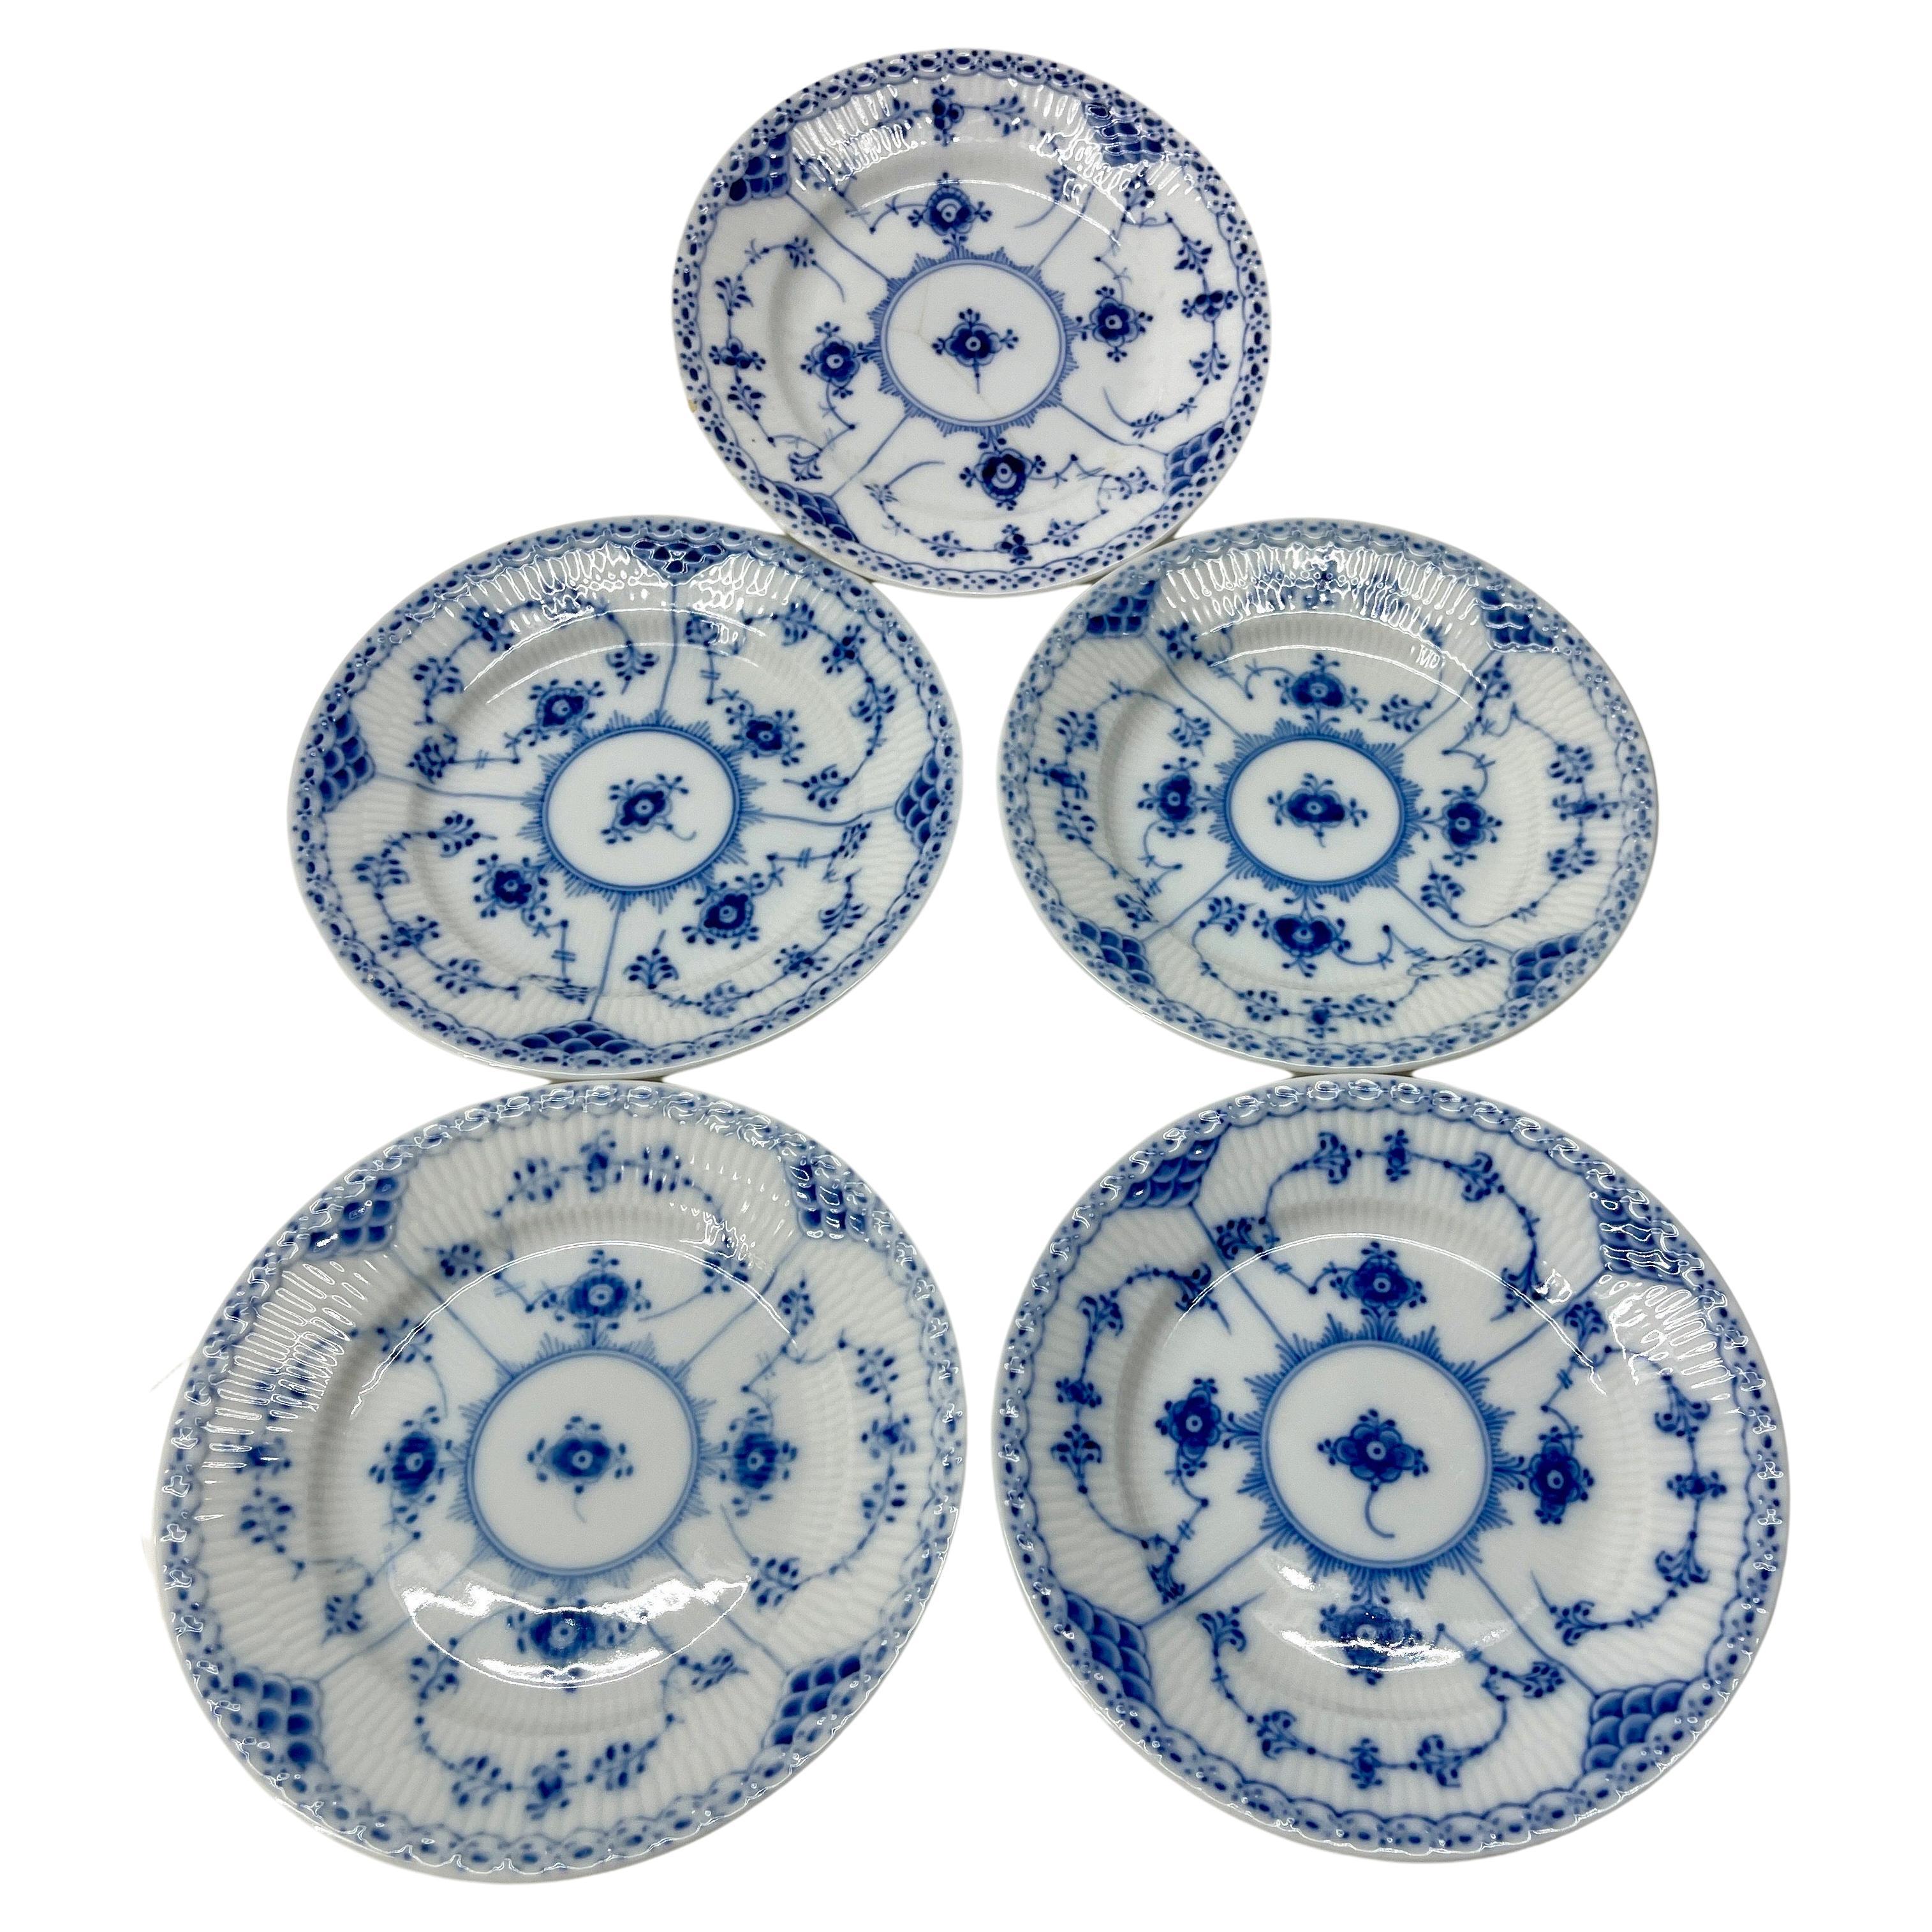 Royal Copenhagen 575 Blue Fluted Half Lace Dessert Plate

Dessert plates, number 575 from Royal Copenhagen. Wonderful addition for any collector or start a new collection with these classic blue and white patterned plates. 